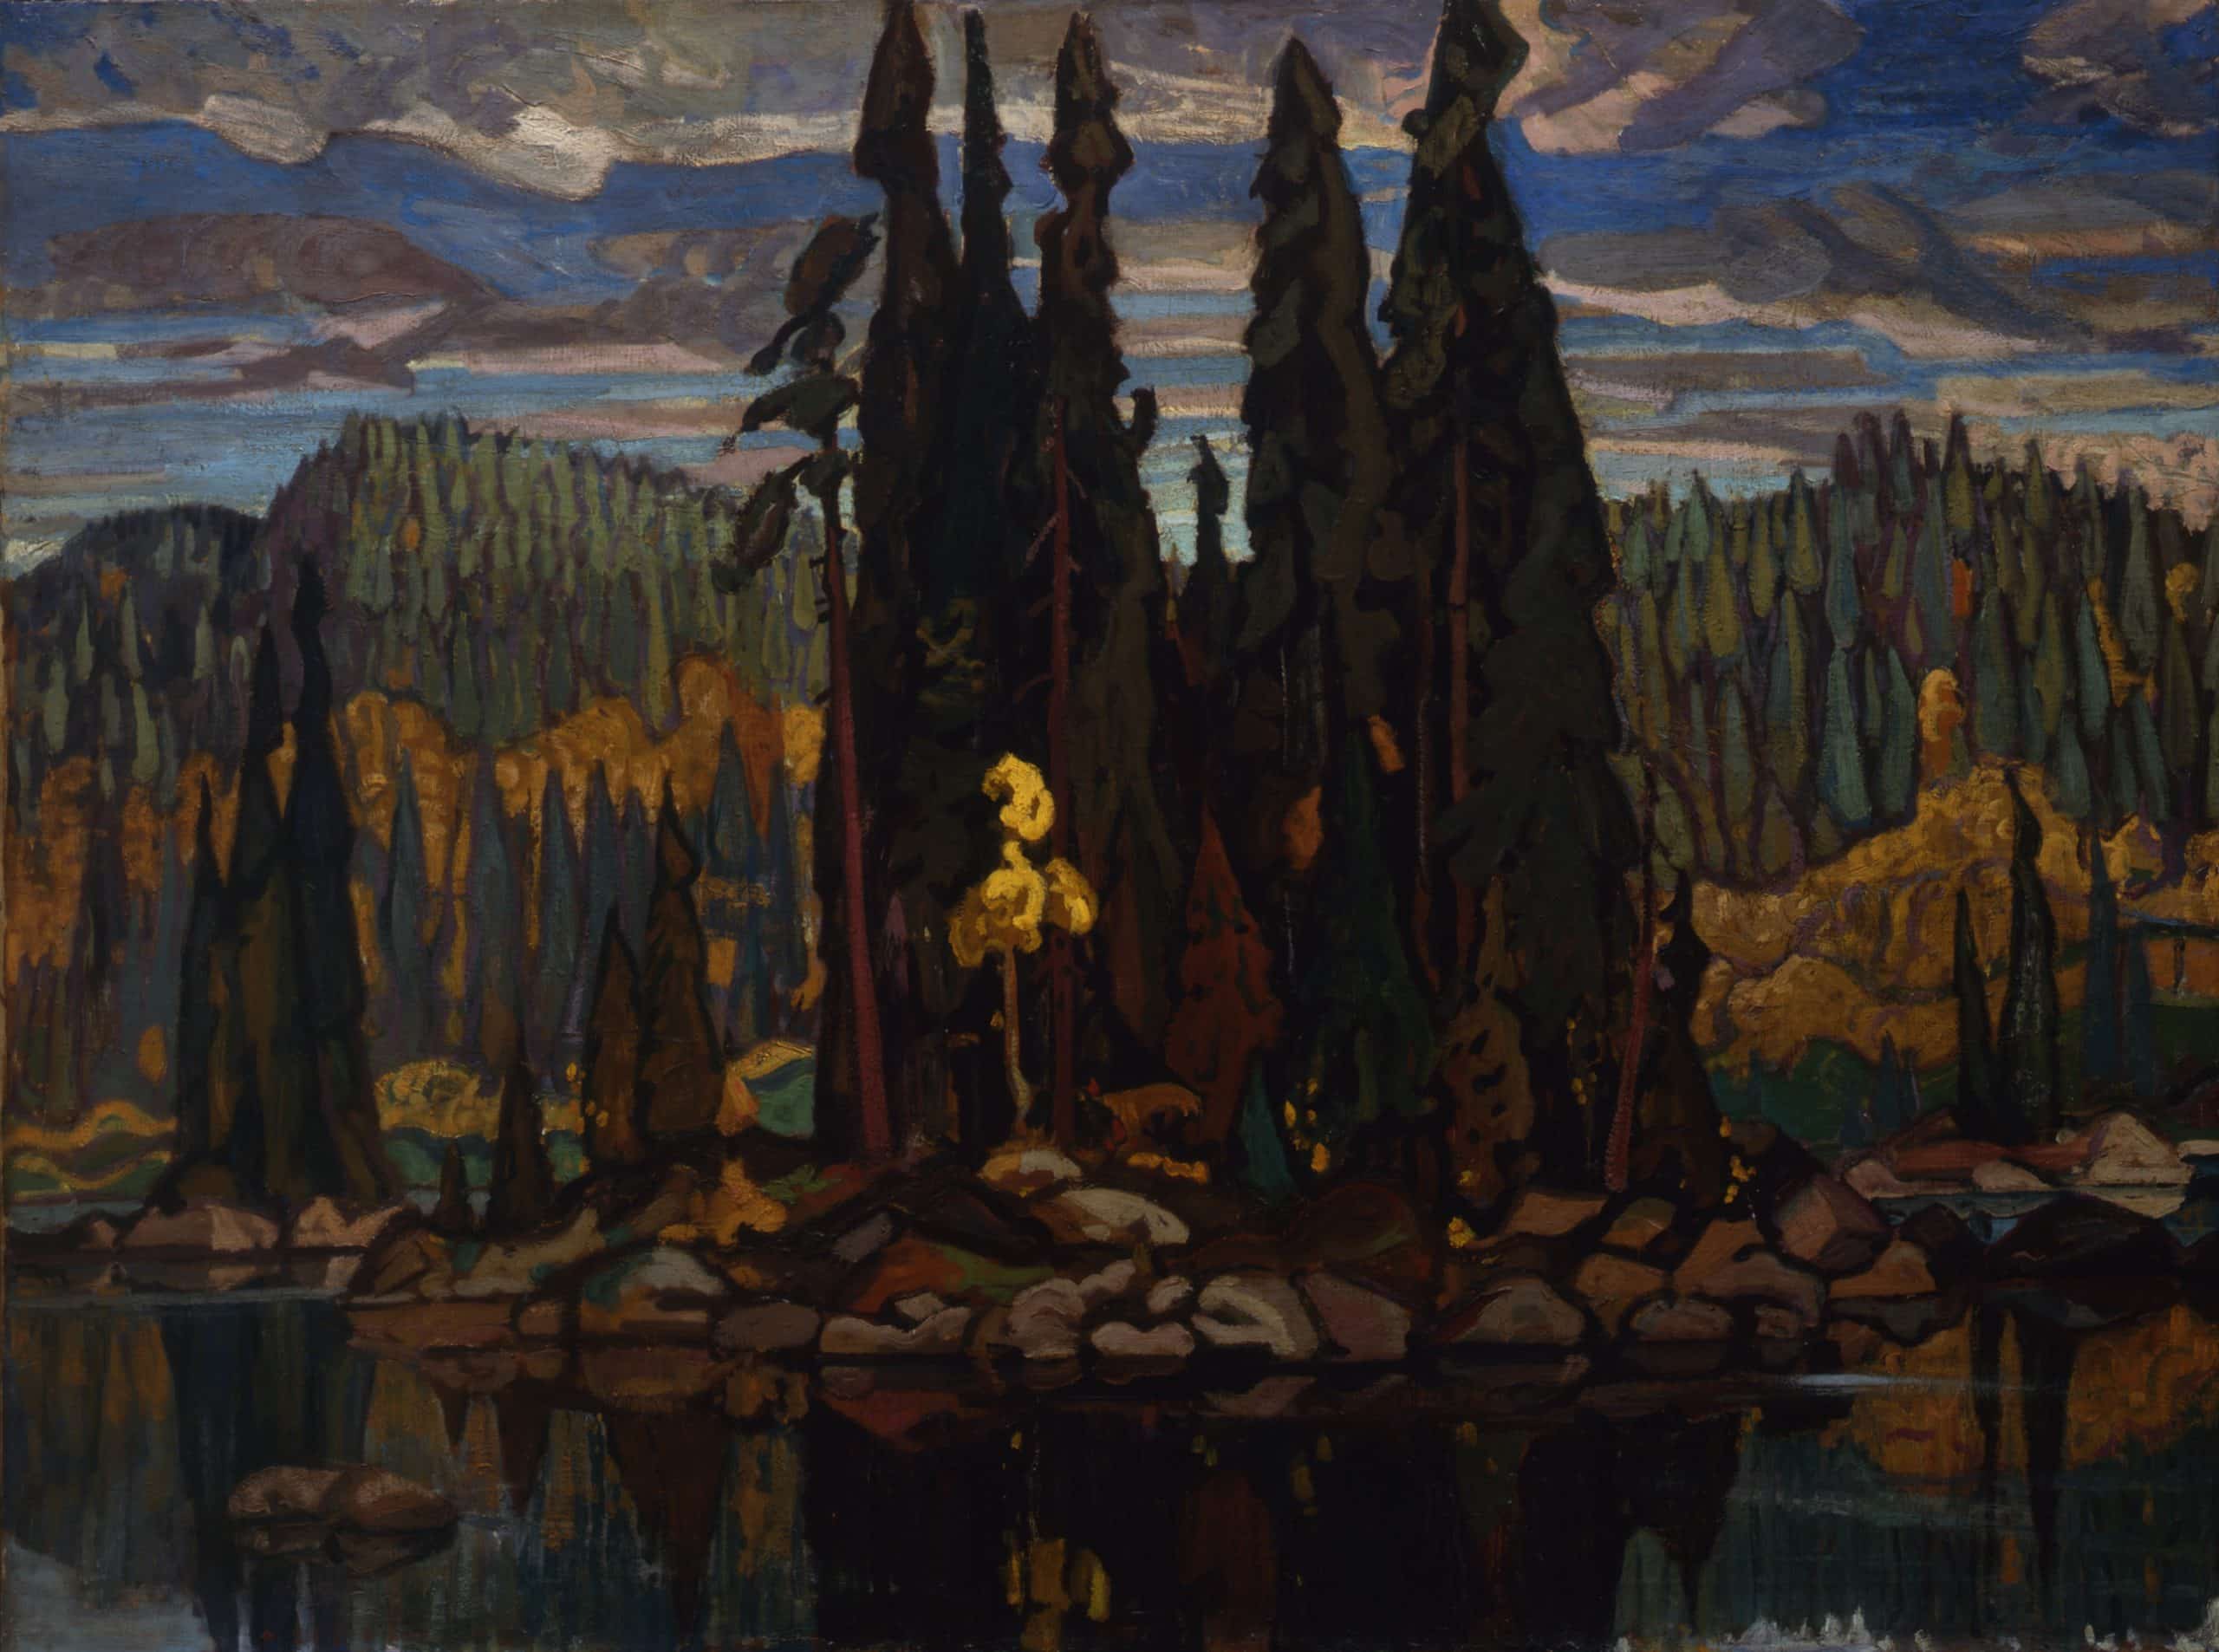 Arthur Lismer, Isles of Spruce, 1922, oil on canvas. Hart House Art Collection, University of Toronto. Purchased by the Hart House Art Committee, 1927/28. Photo: Toni Hafkenscheid